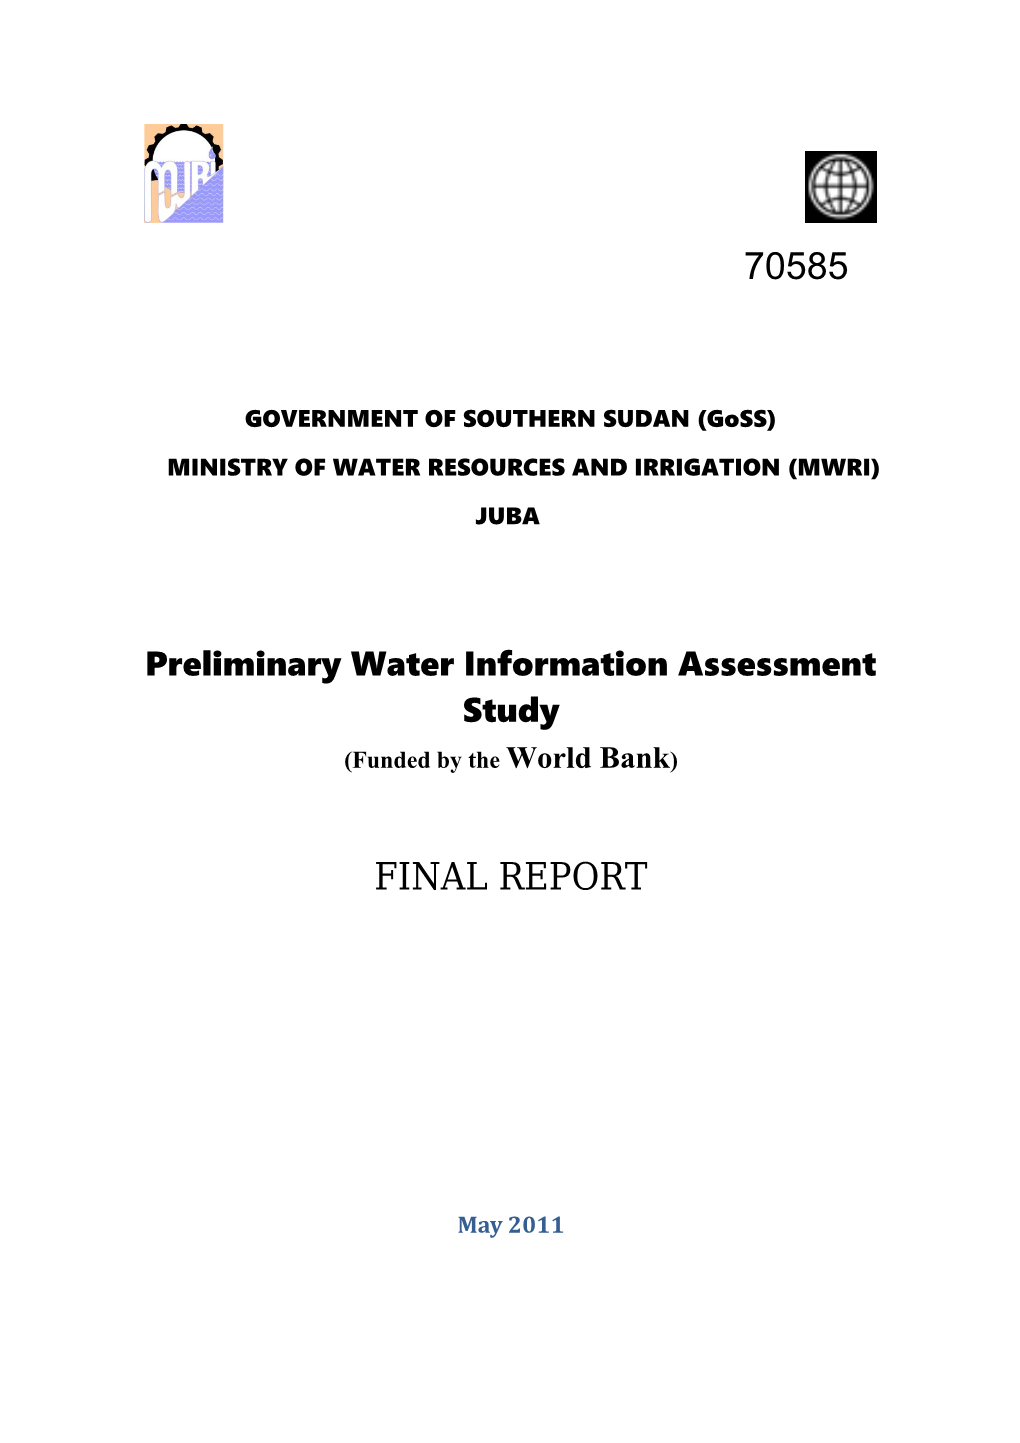 Southern Sudan: Preliminary Water Resources